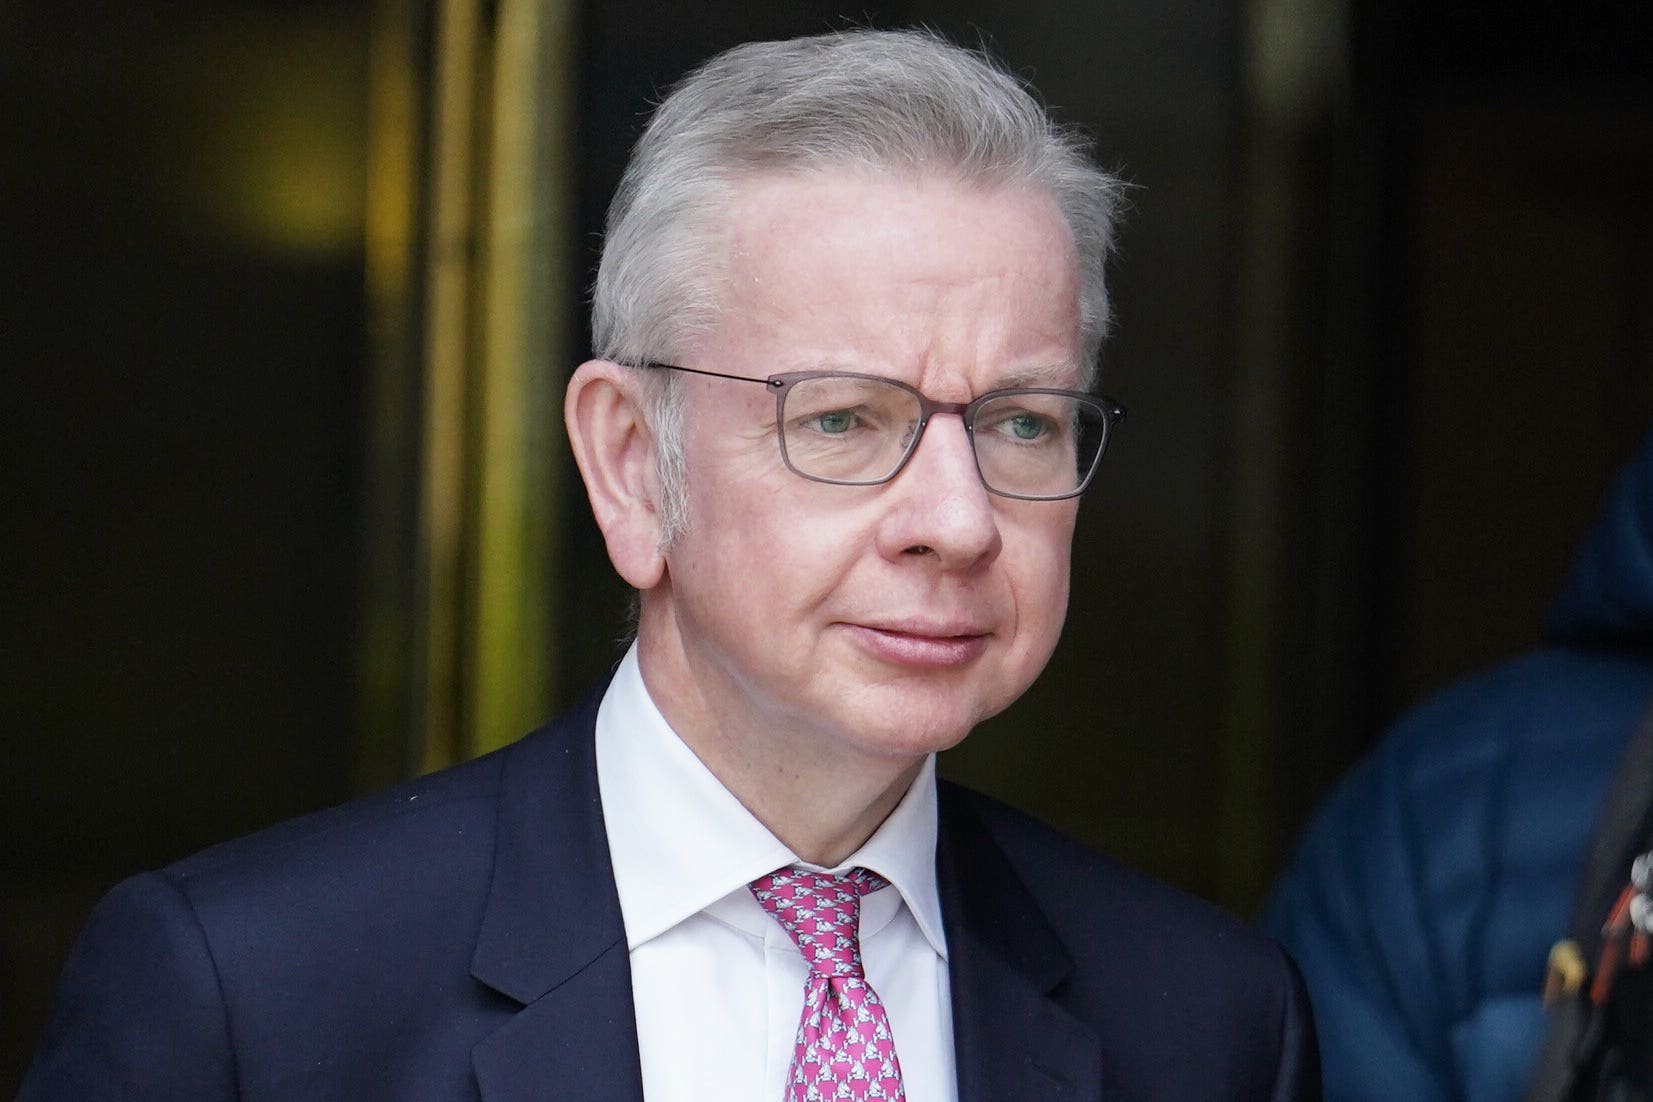 renters reform bill fast becoming landlords’ charter after gove’s concessions, say campaigners